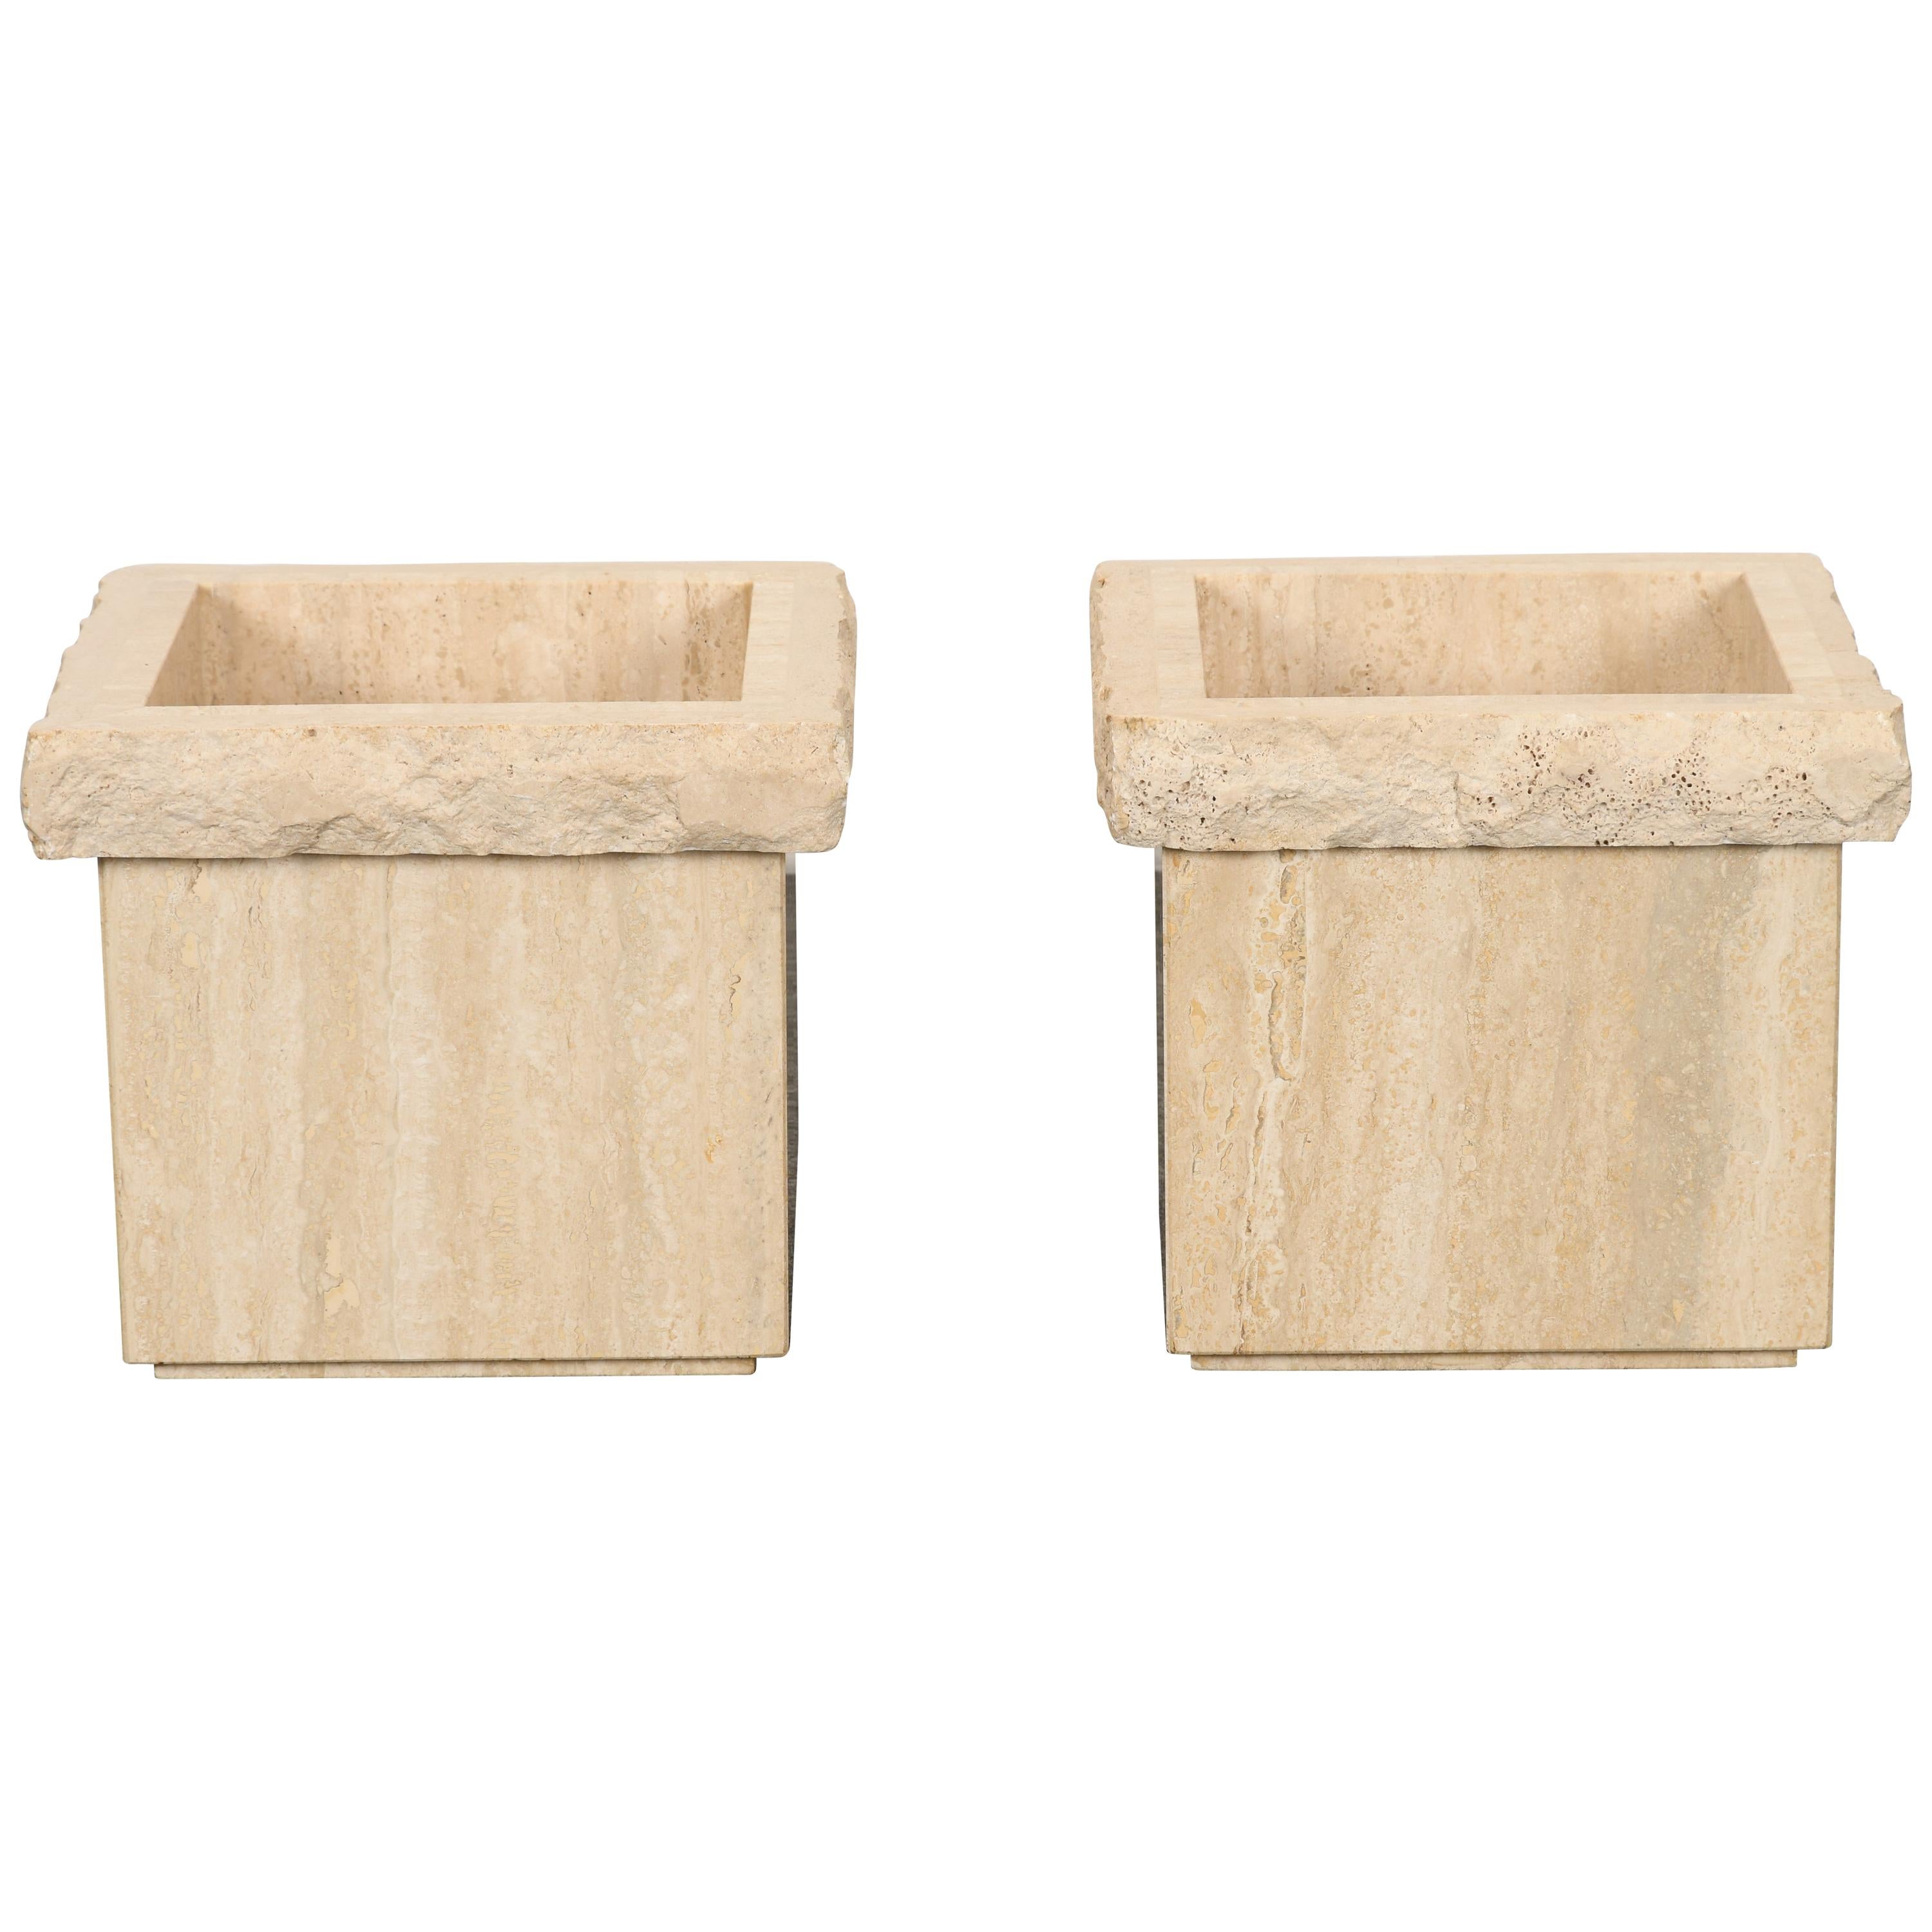 Pair of Travertine Roche Bobois Style Marble Planters, 1970s